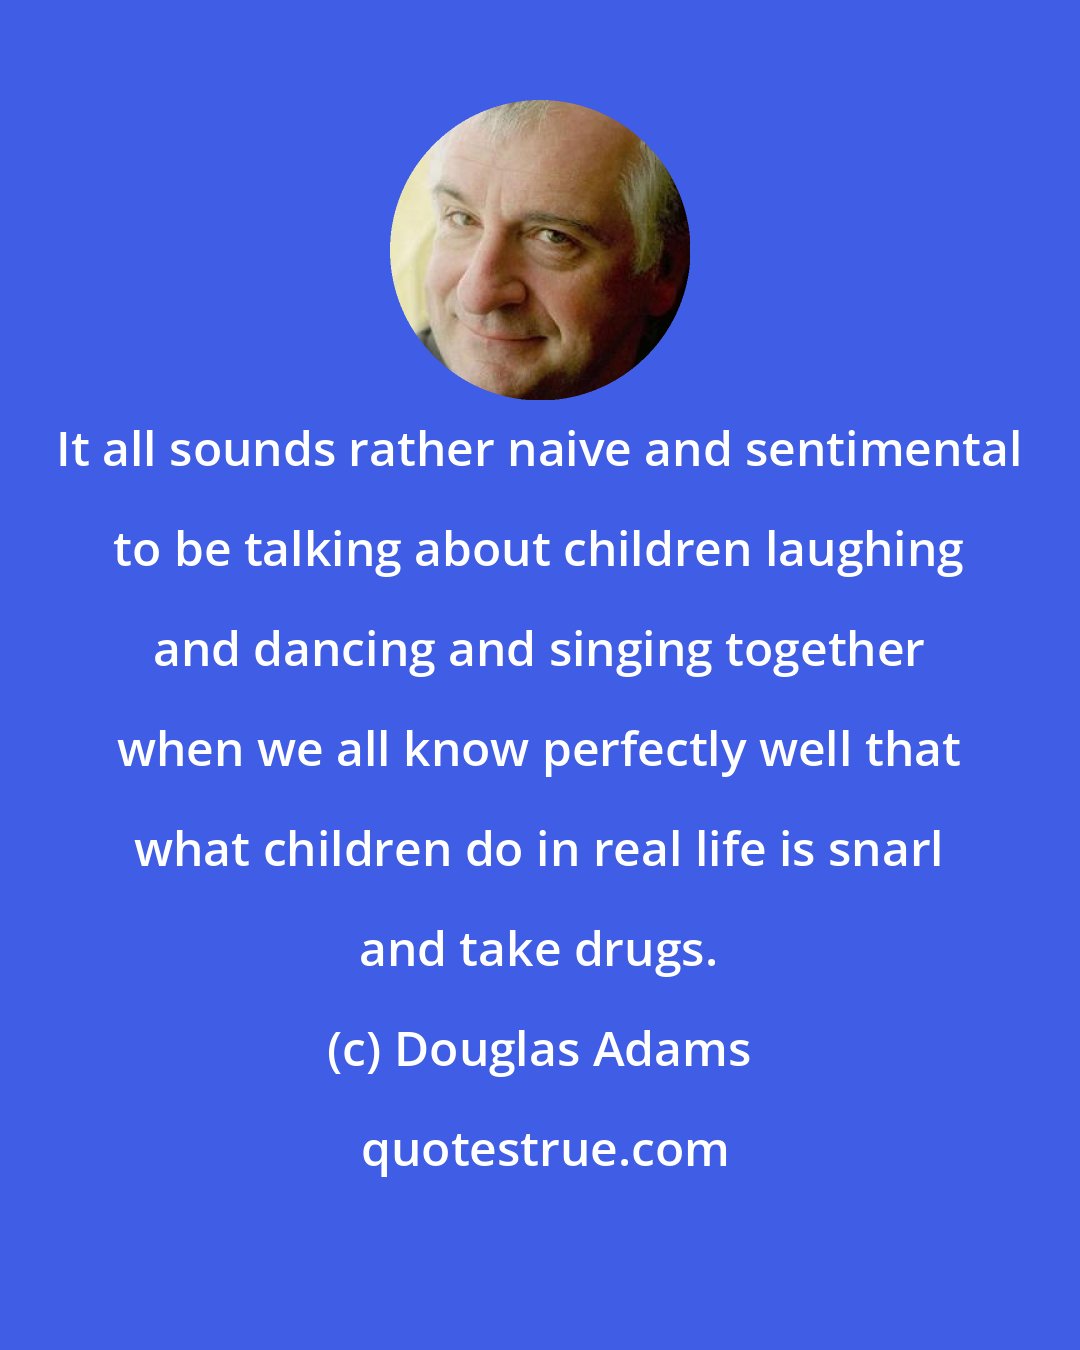 Douglas Adams: It all sounds rather naive and sentimental to be talking about children laughing and dancing and singing together when we all know perfectly well that what children do in real life is snarl and take drugs.